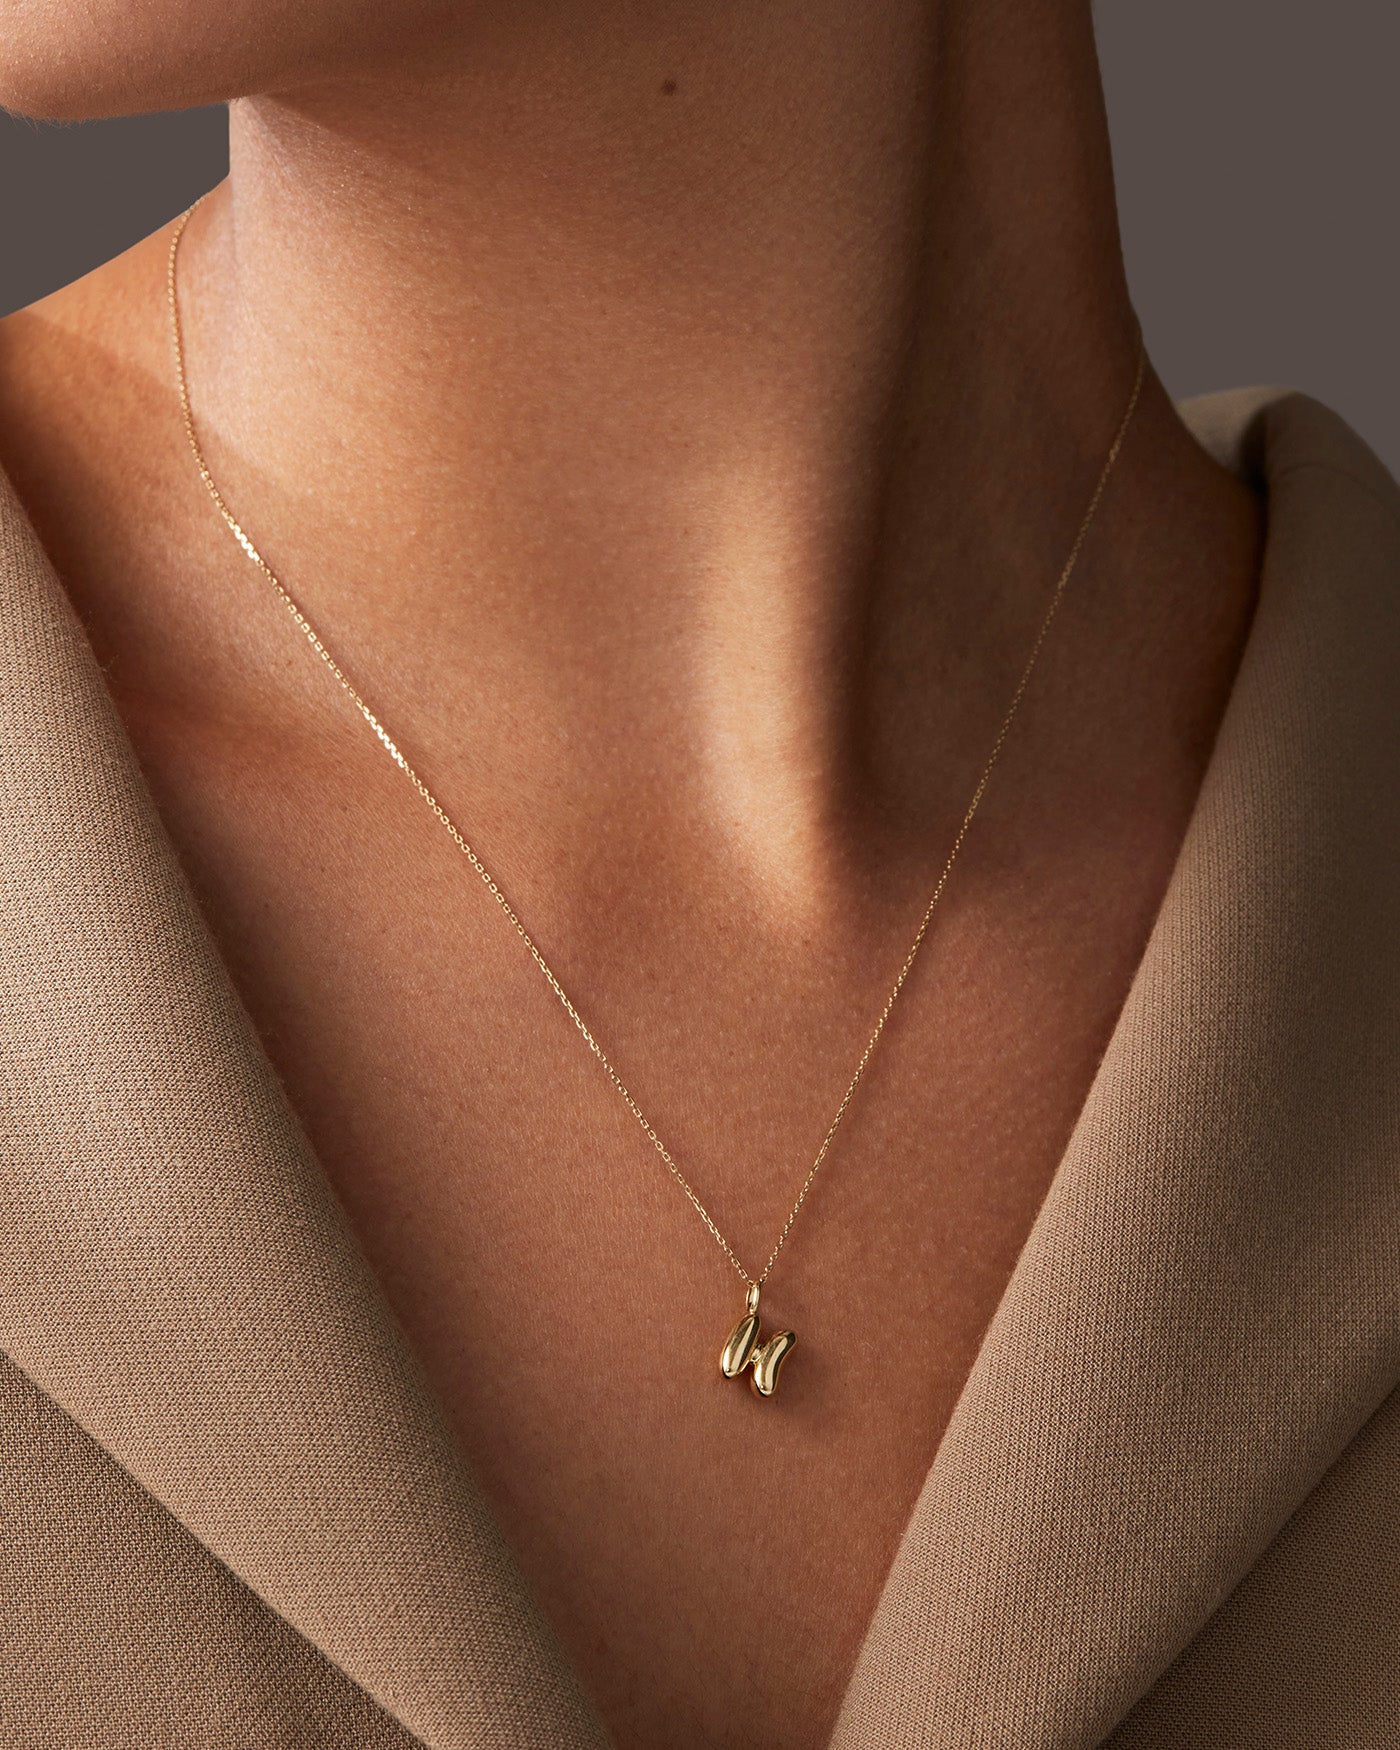 Diamond Necklace With Initial (14K Gold) - Jewelry For Her